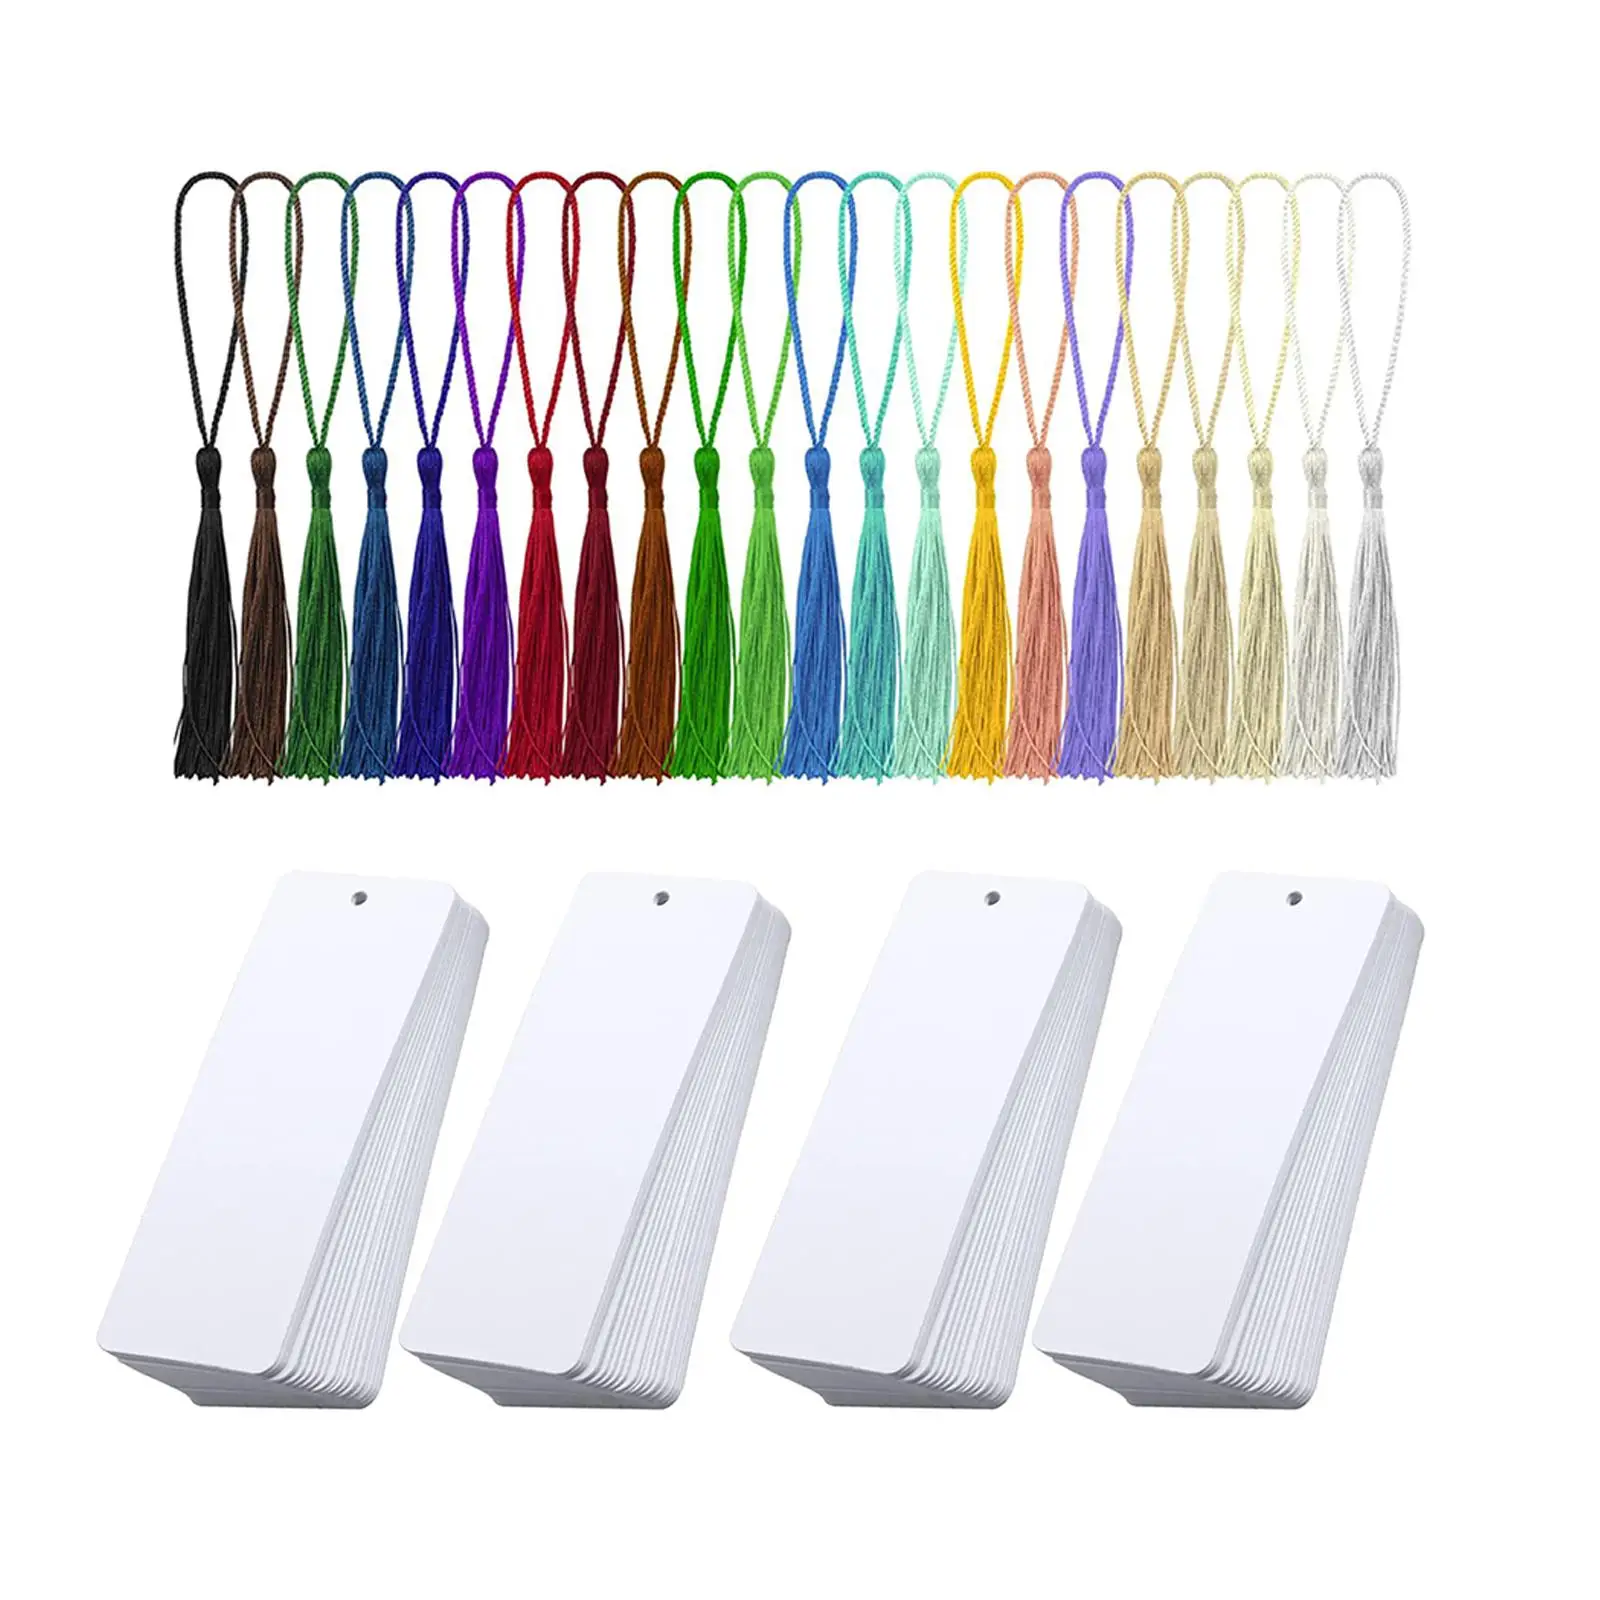 80x Blank White Bookmarks with Tassels Reading Book Markers White Bookmarks Crafting DIY Bookmarks for School Supply Present Tag